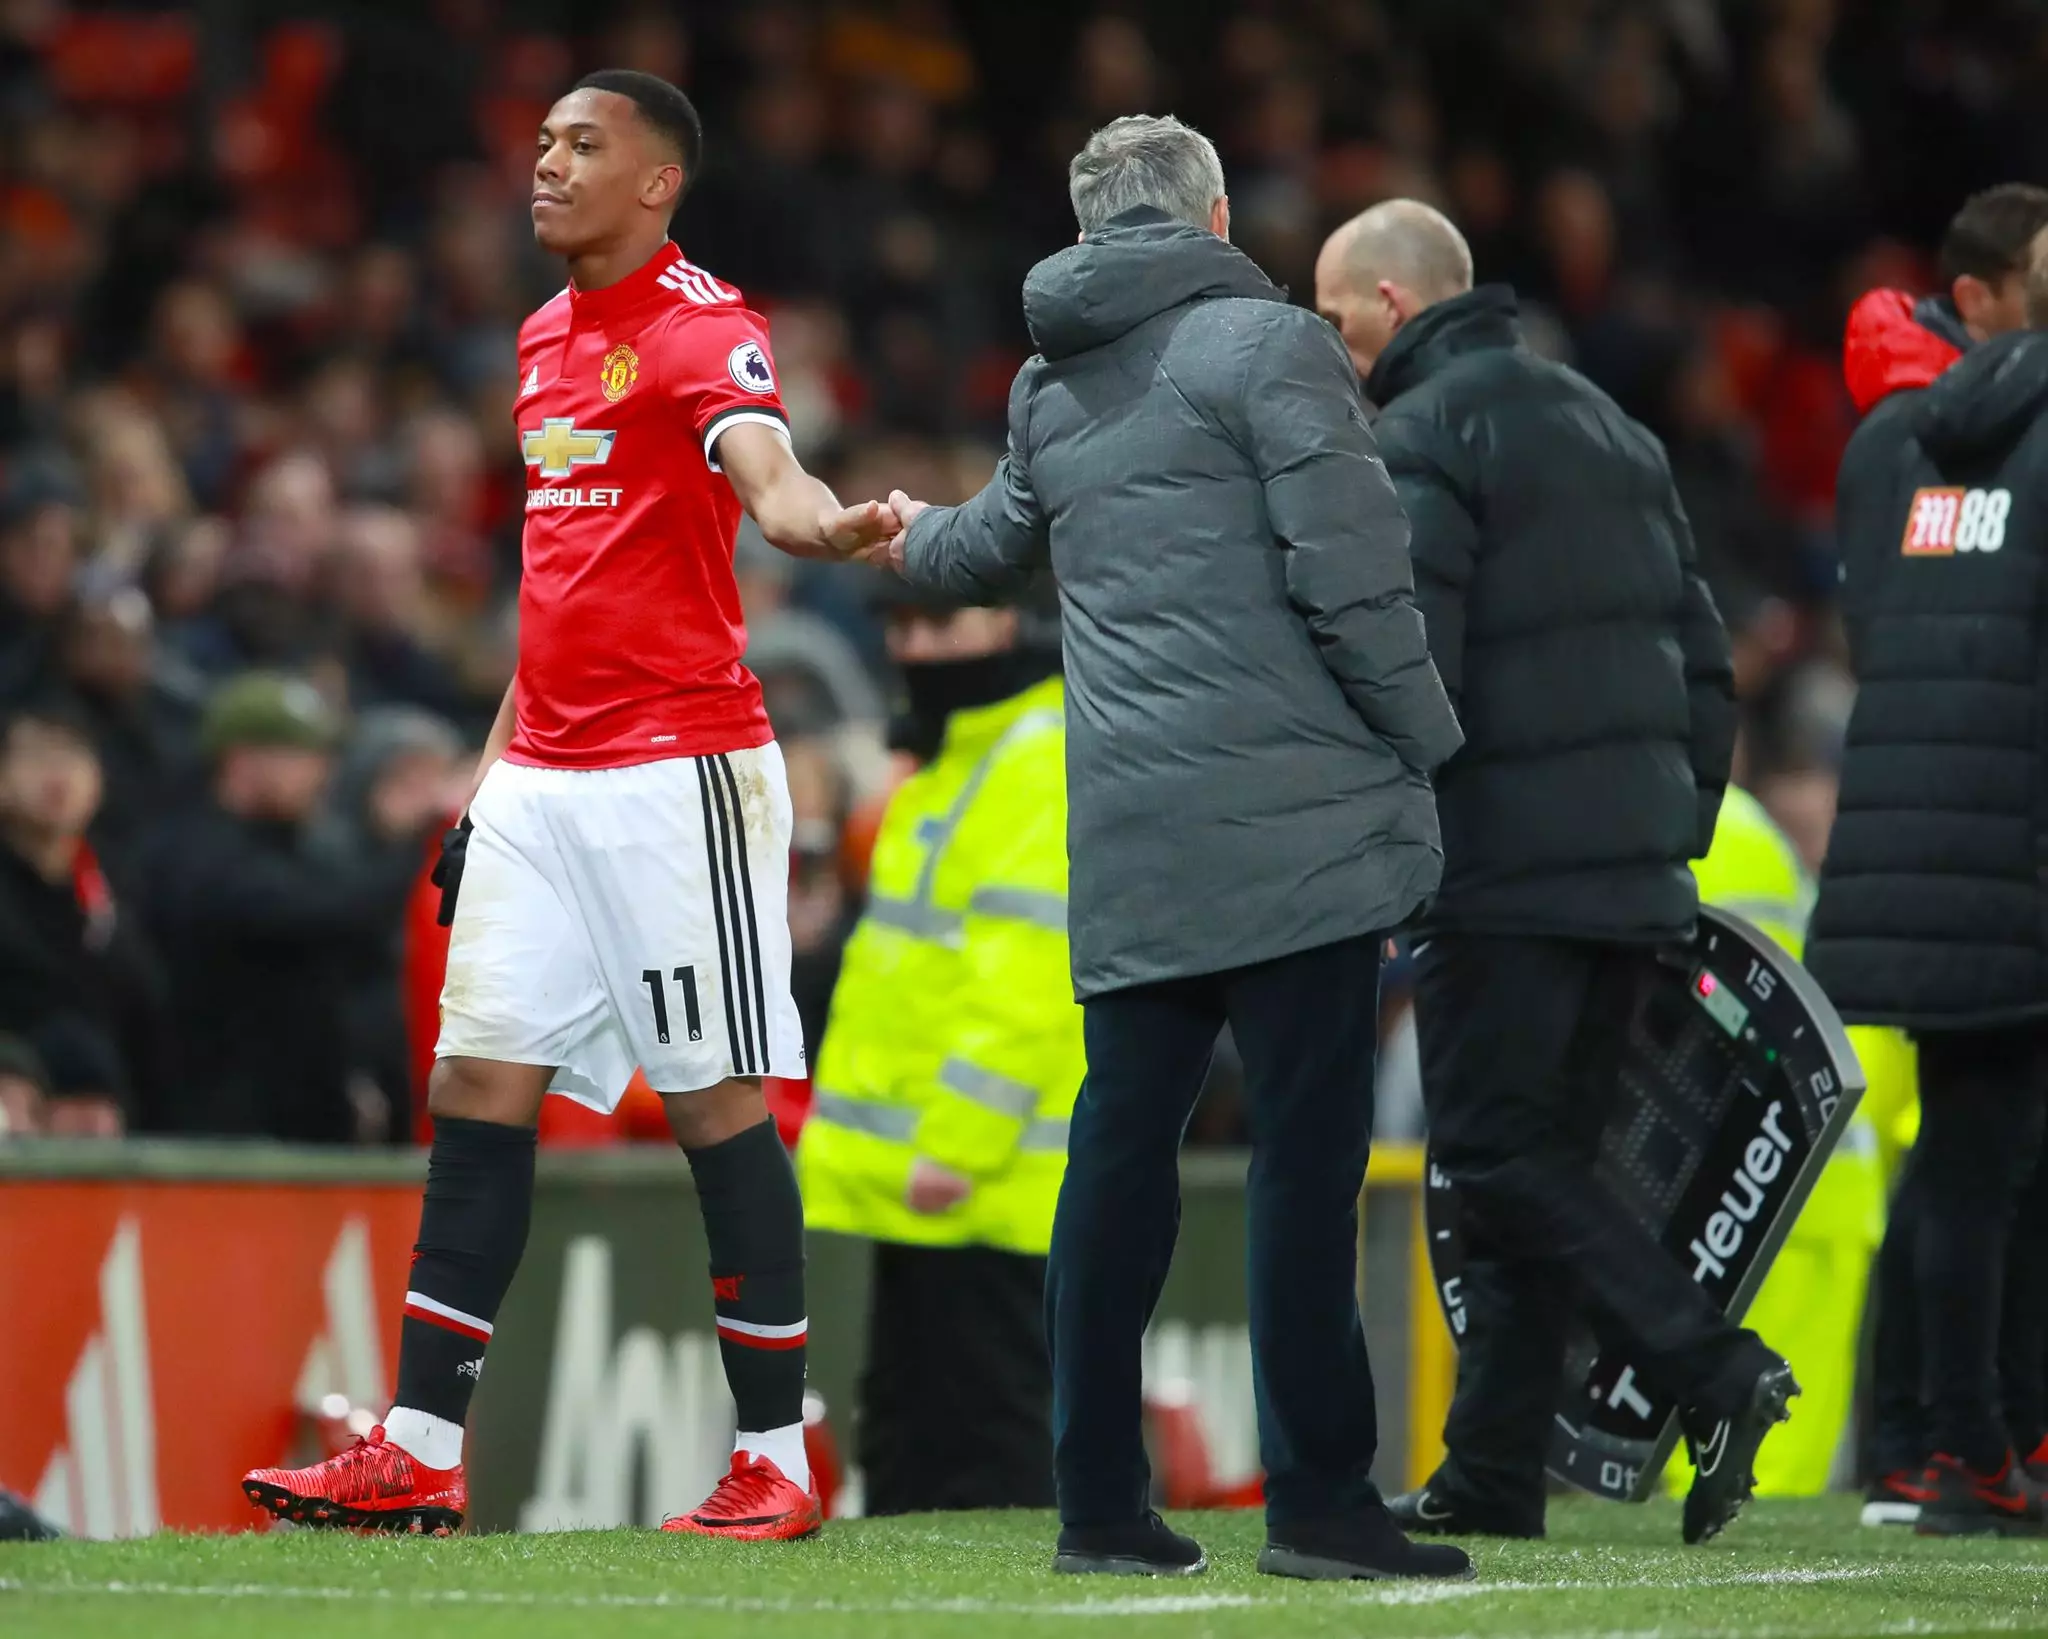 Mourinho shakes hands with Martial. Image: PA